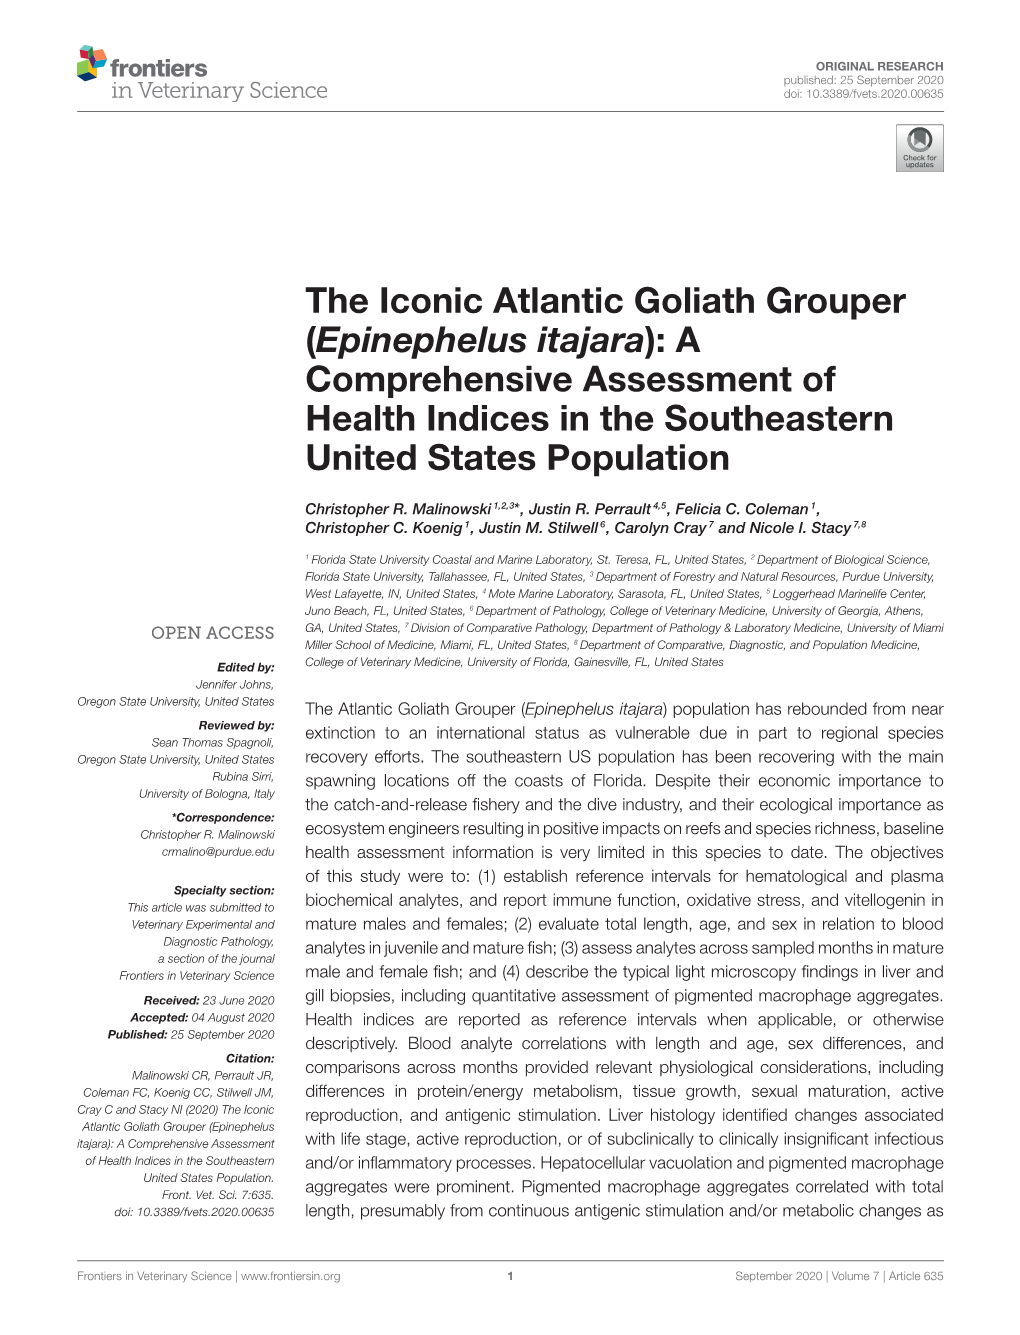 The Iconic Atlantic Goliath Grouper (Epinephelus Itajara): a Comprehensive Assessment of Health Indices in the Southeastern United States Population